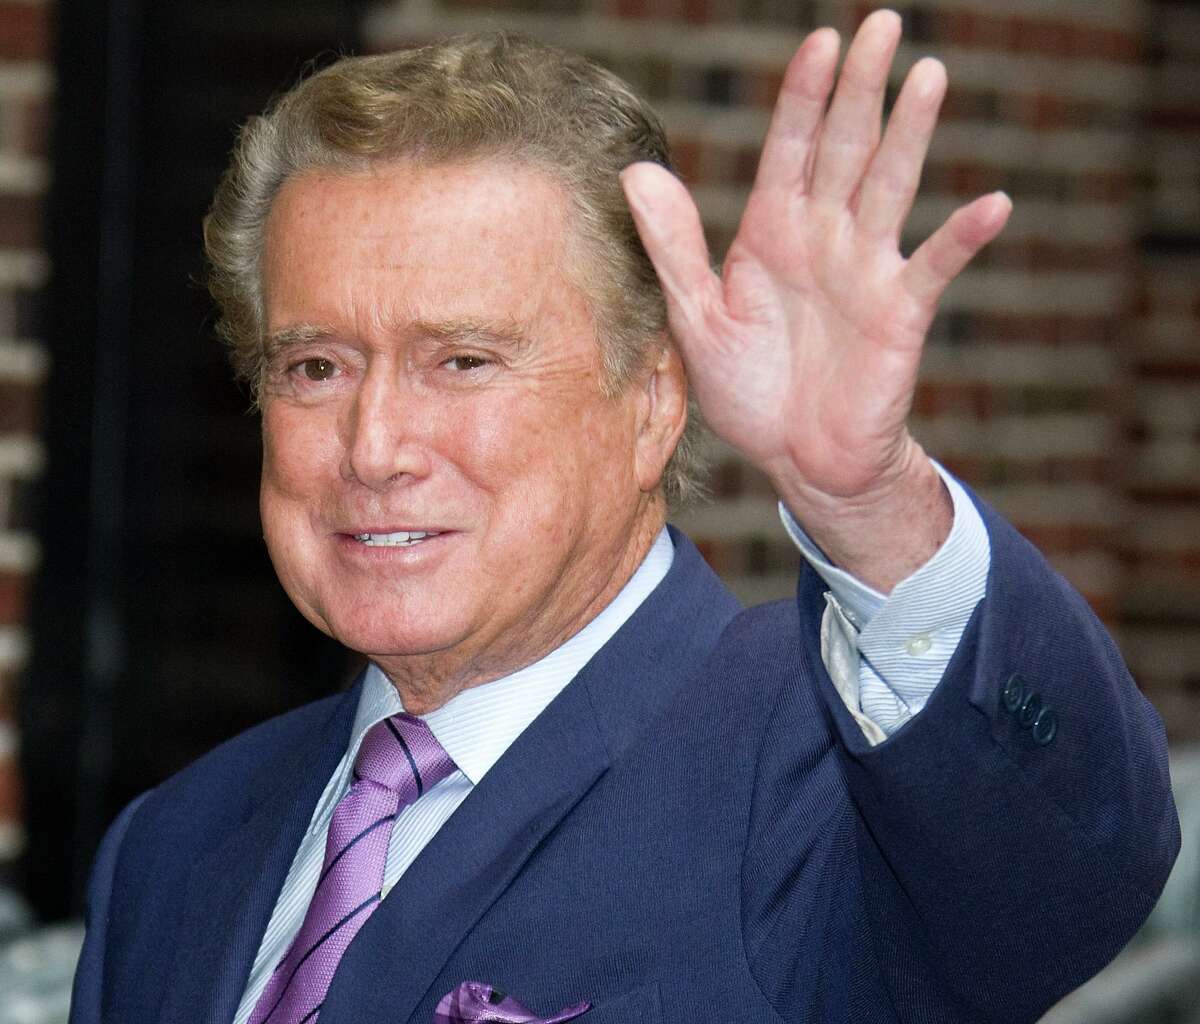 FILE - In this June 11, 2009 file photo, talk show host Regis Philbin arrives for a taping of "The Late Show with David Letterman" in New York. (AP Photo/Charles Sykes, file)